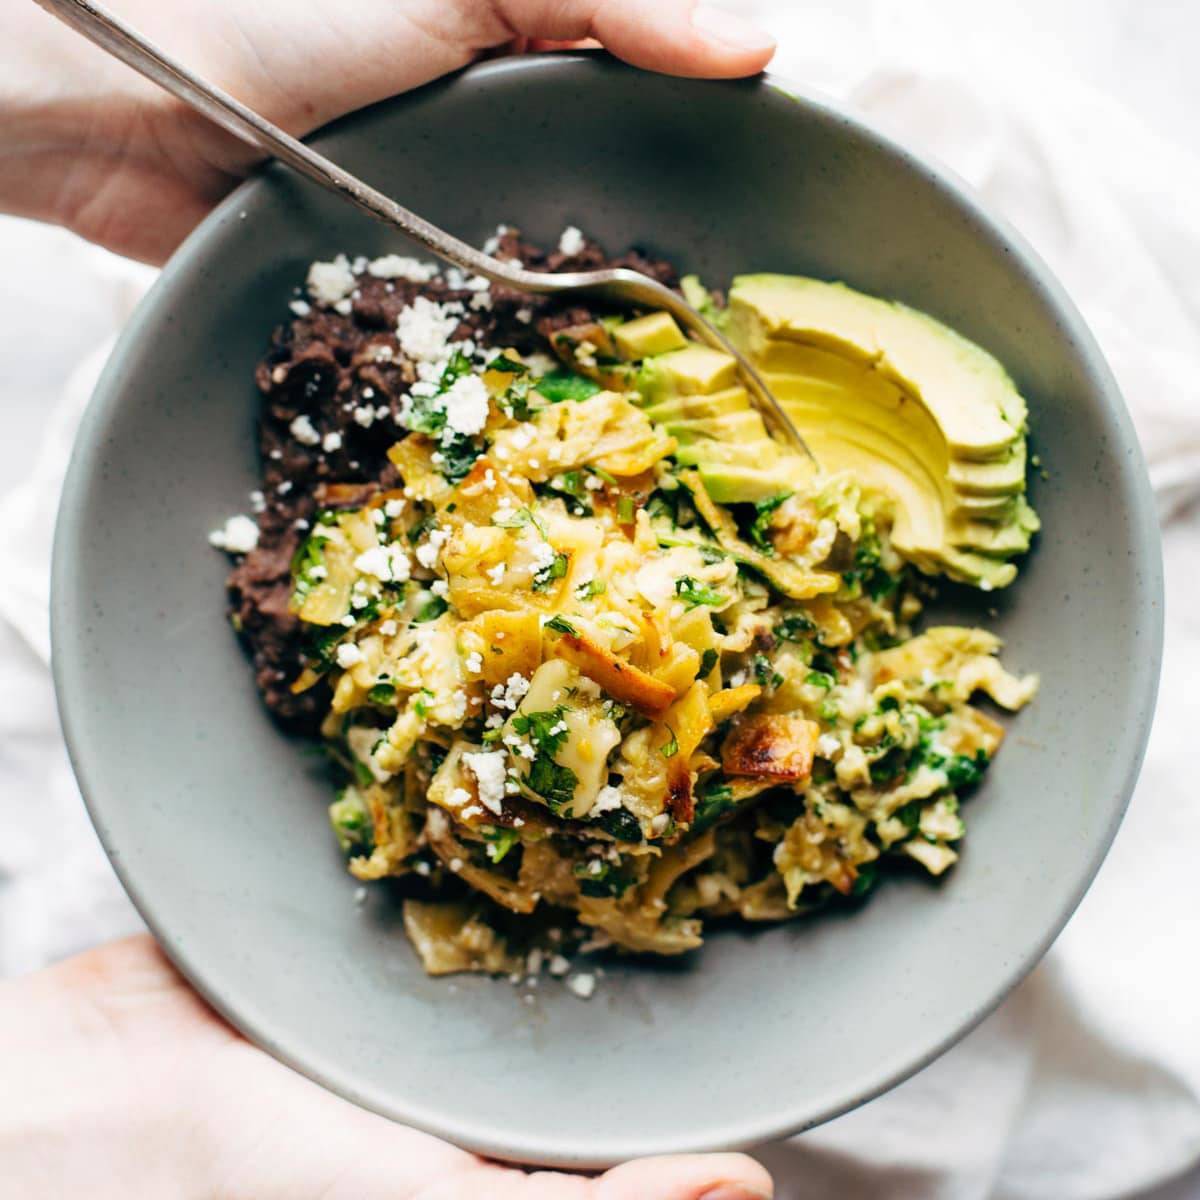 Migas in a bowl with avocado and refried black beans.